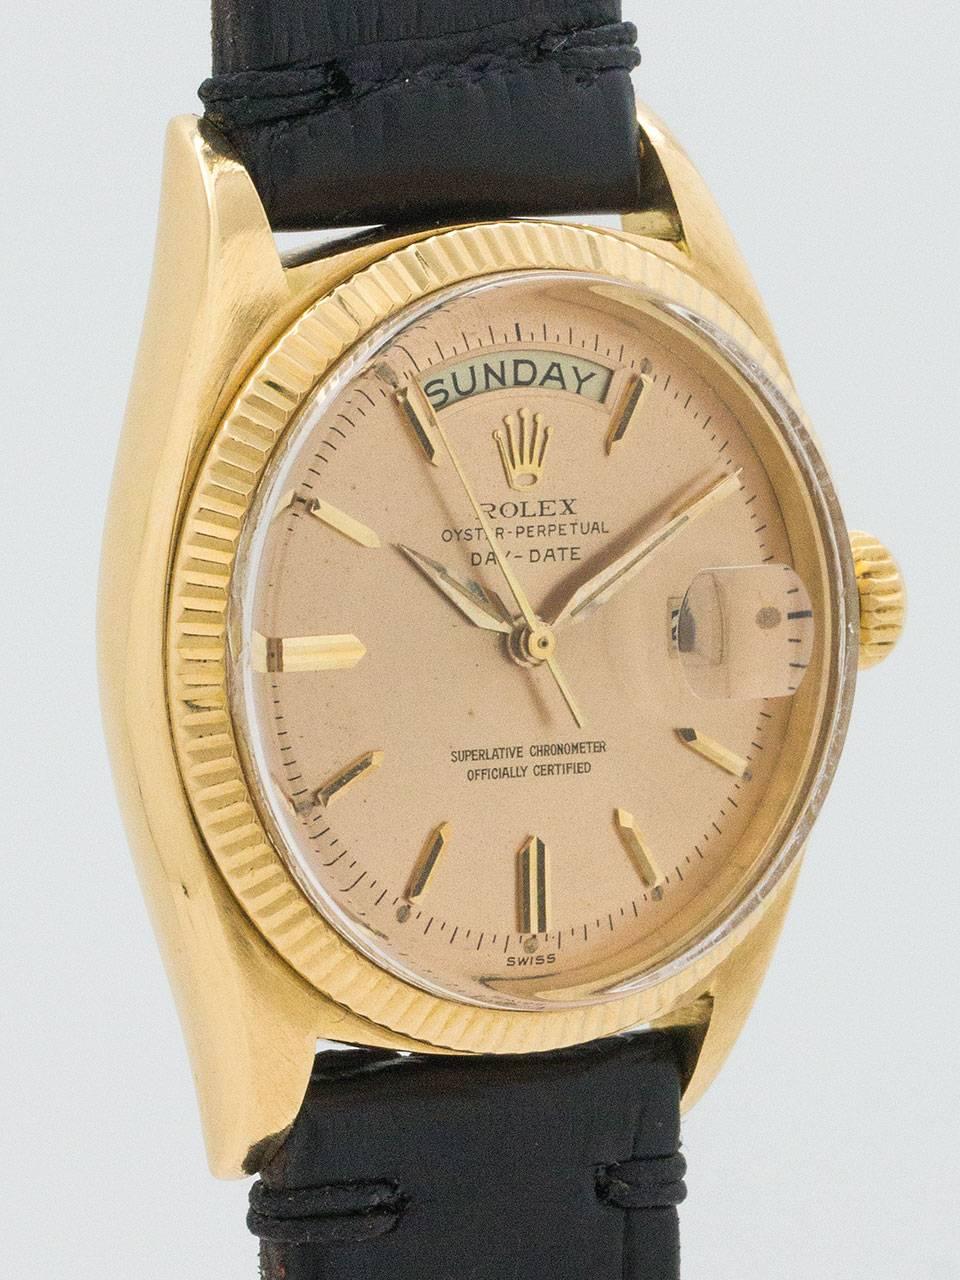 Rolex 18K Yellow Gold Day Date President ref 1803 serial number 610,xxx circa 1968. 36mm diameter case with fluted bezel and acrylic crystal. Exceptional original antique rose dial with applied gold indexes and early style tapered dauphine hands.